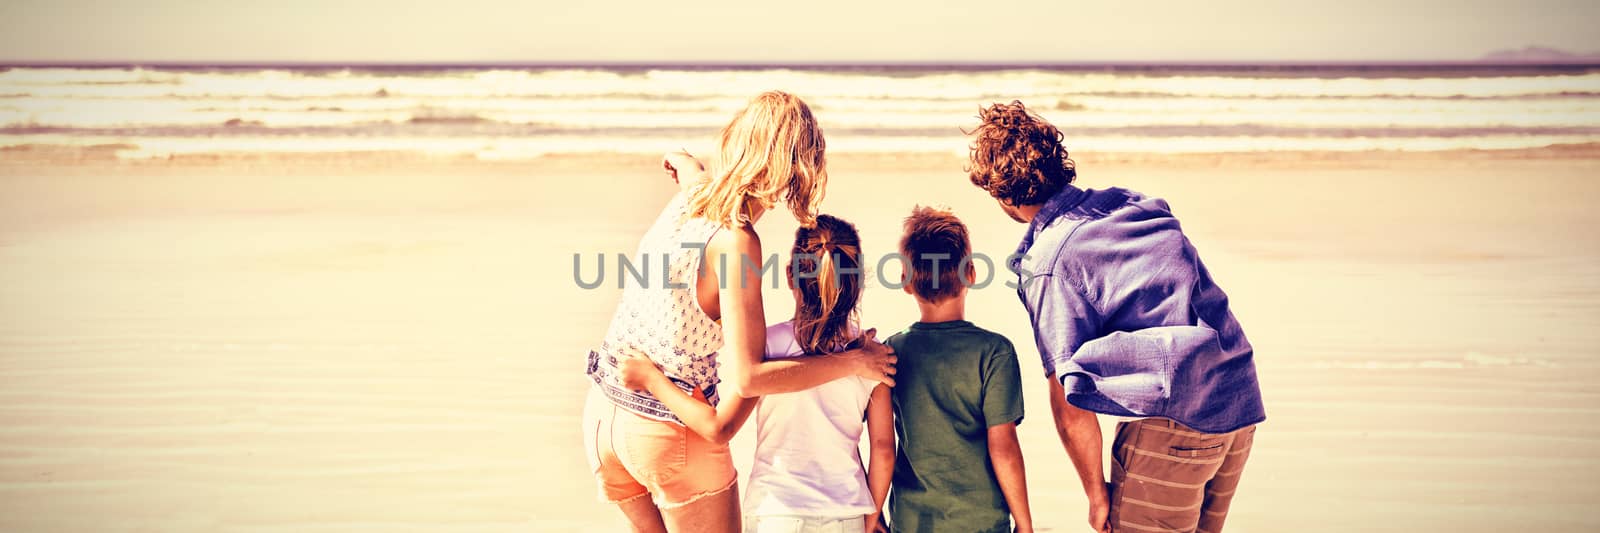 Rear view of family standing together at beach by Wavebreakmedia